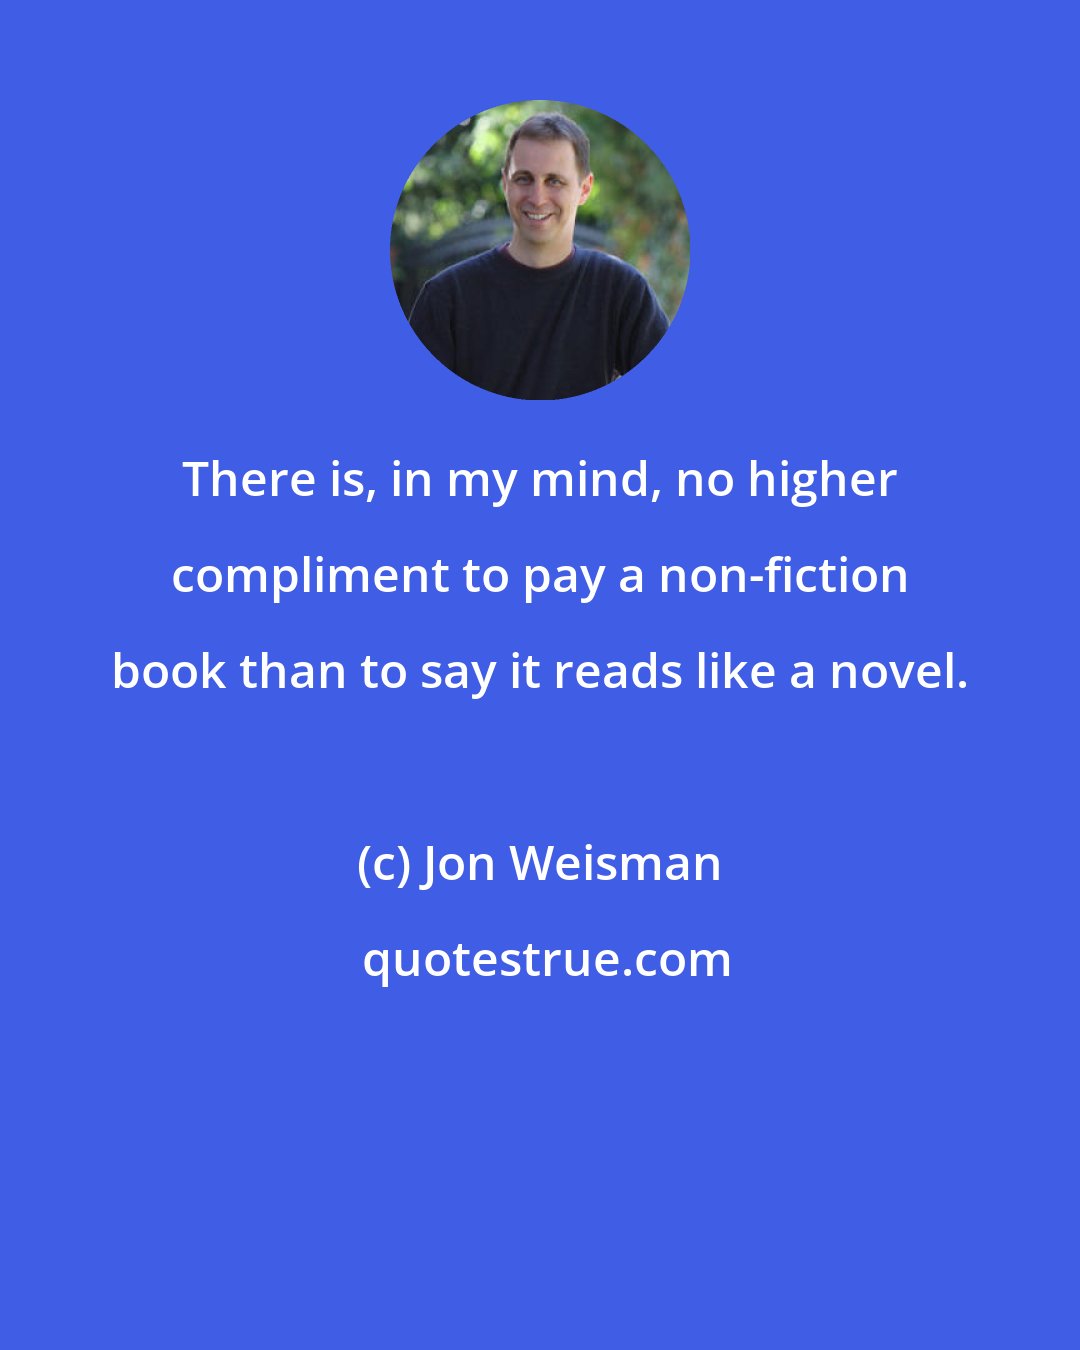 Jon Weisman: There is, in my mind, no higher compliment to pay a non-fiction book than to say it reads like a novel.